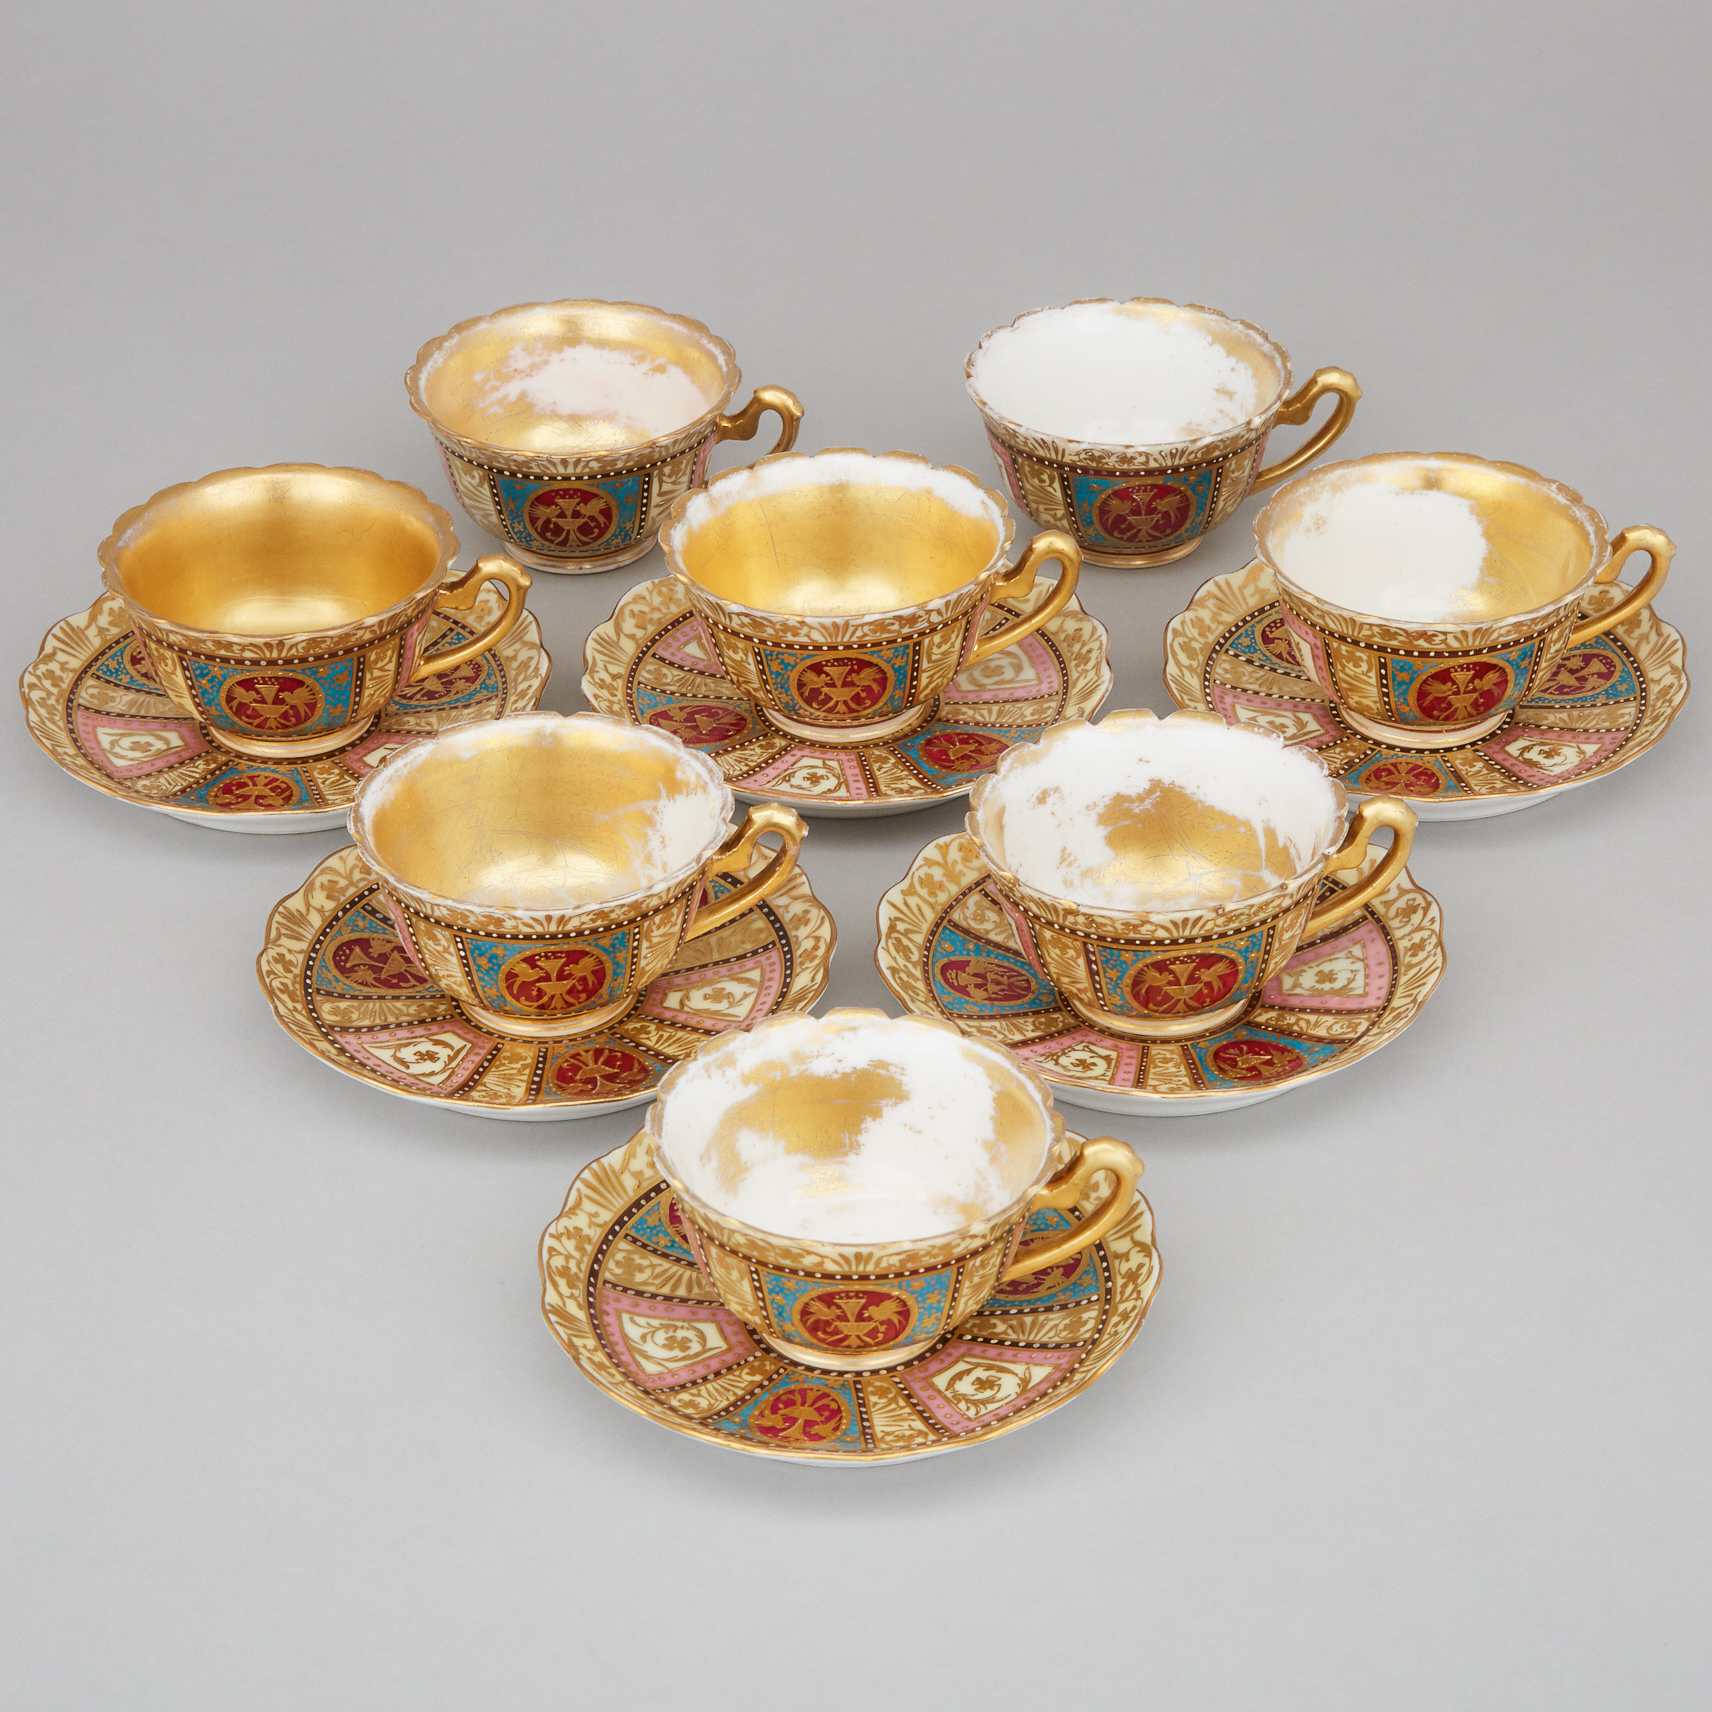 Eight 'Vienna' Cups and Six Saucers, late 19th century